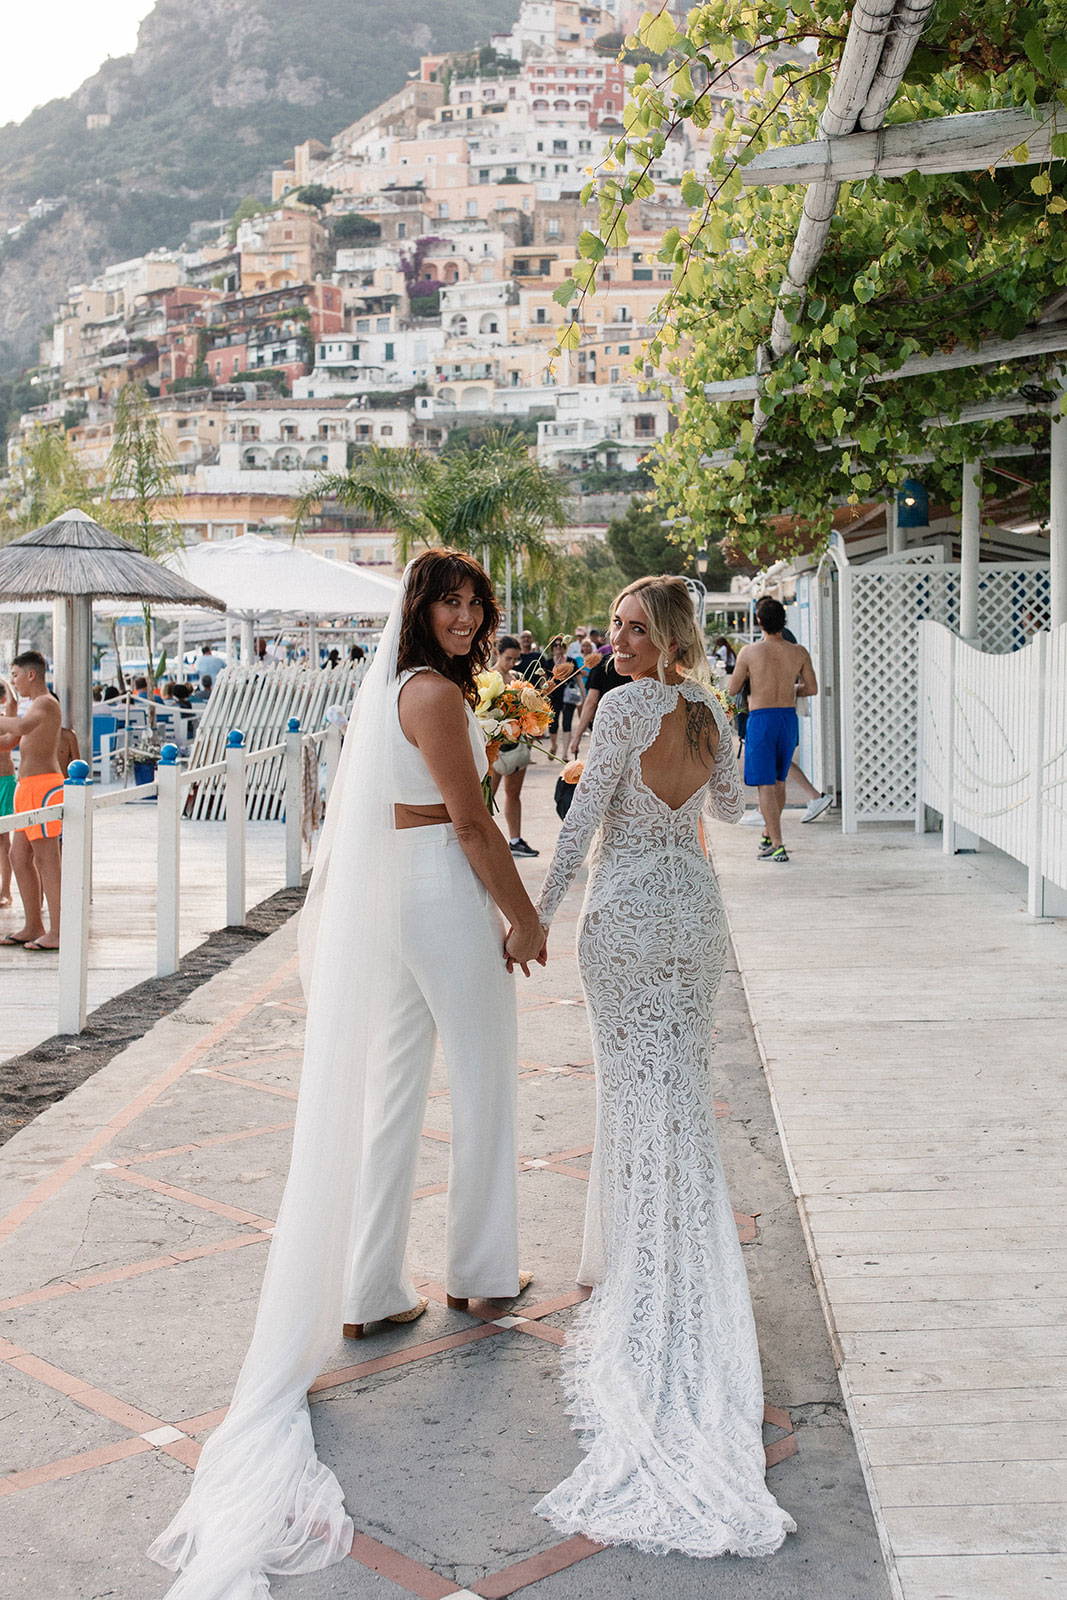 Brides holding hands on walking strip in Italy